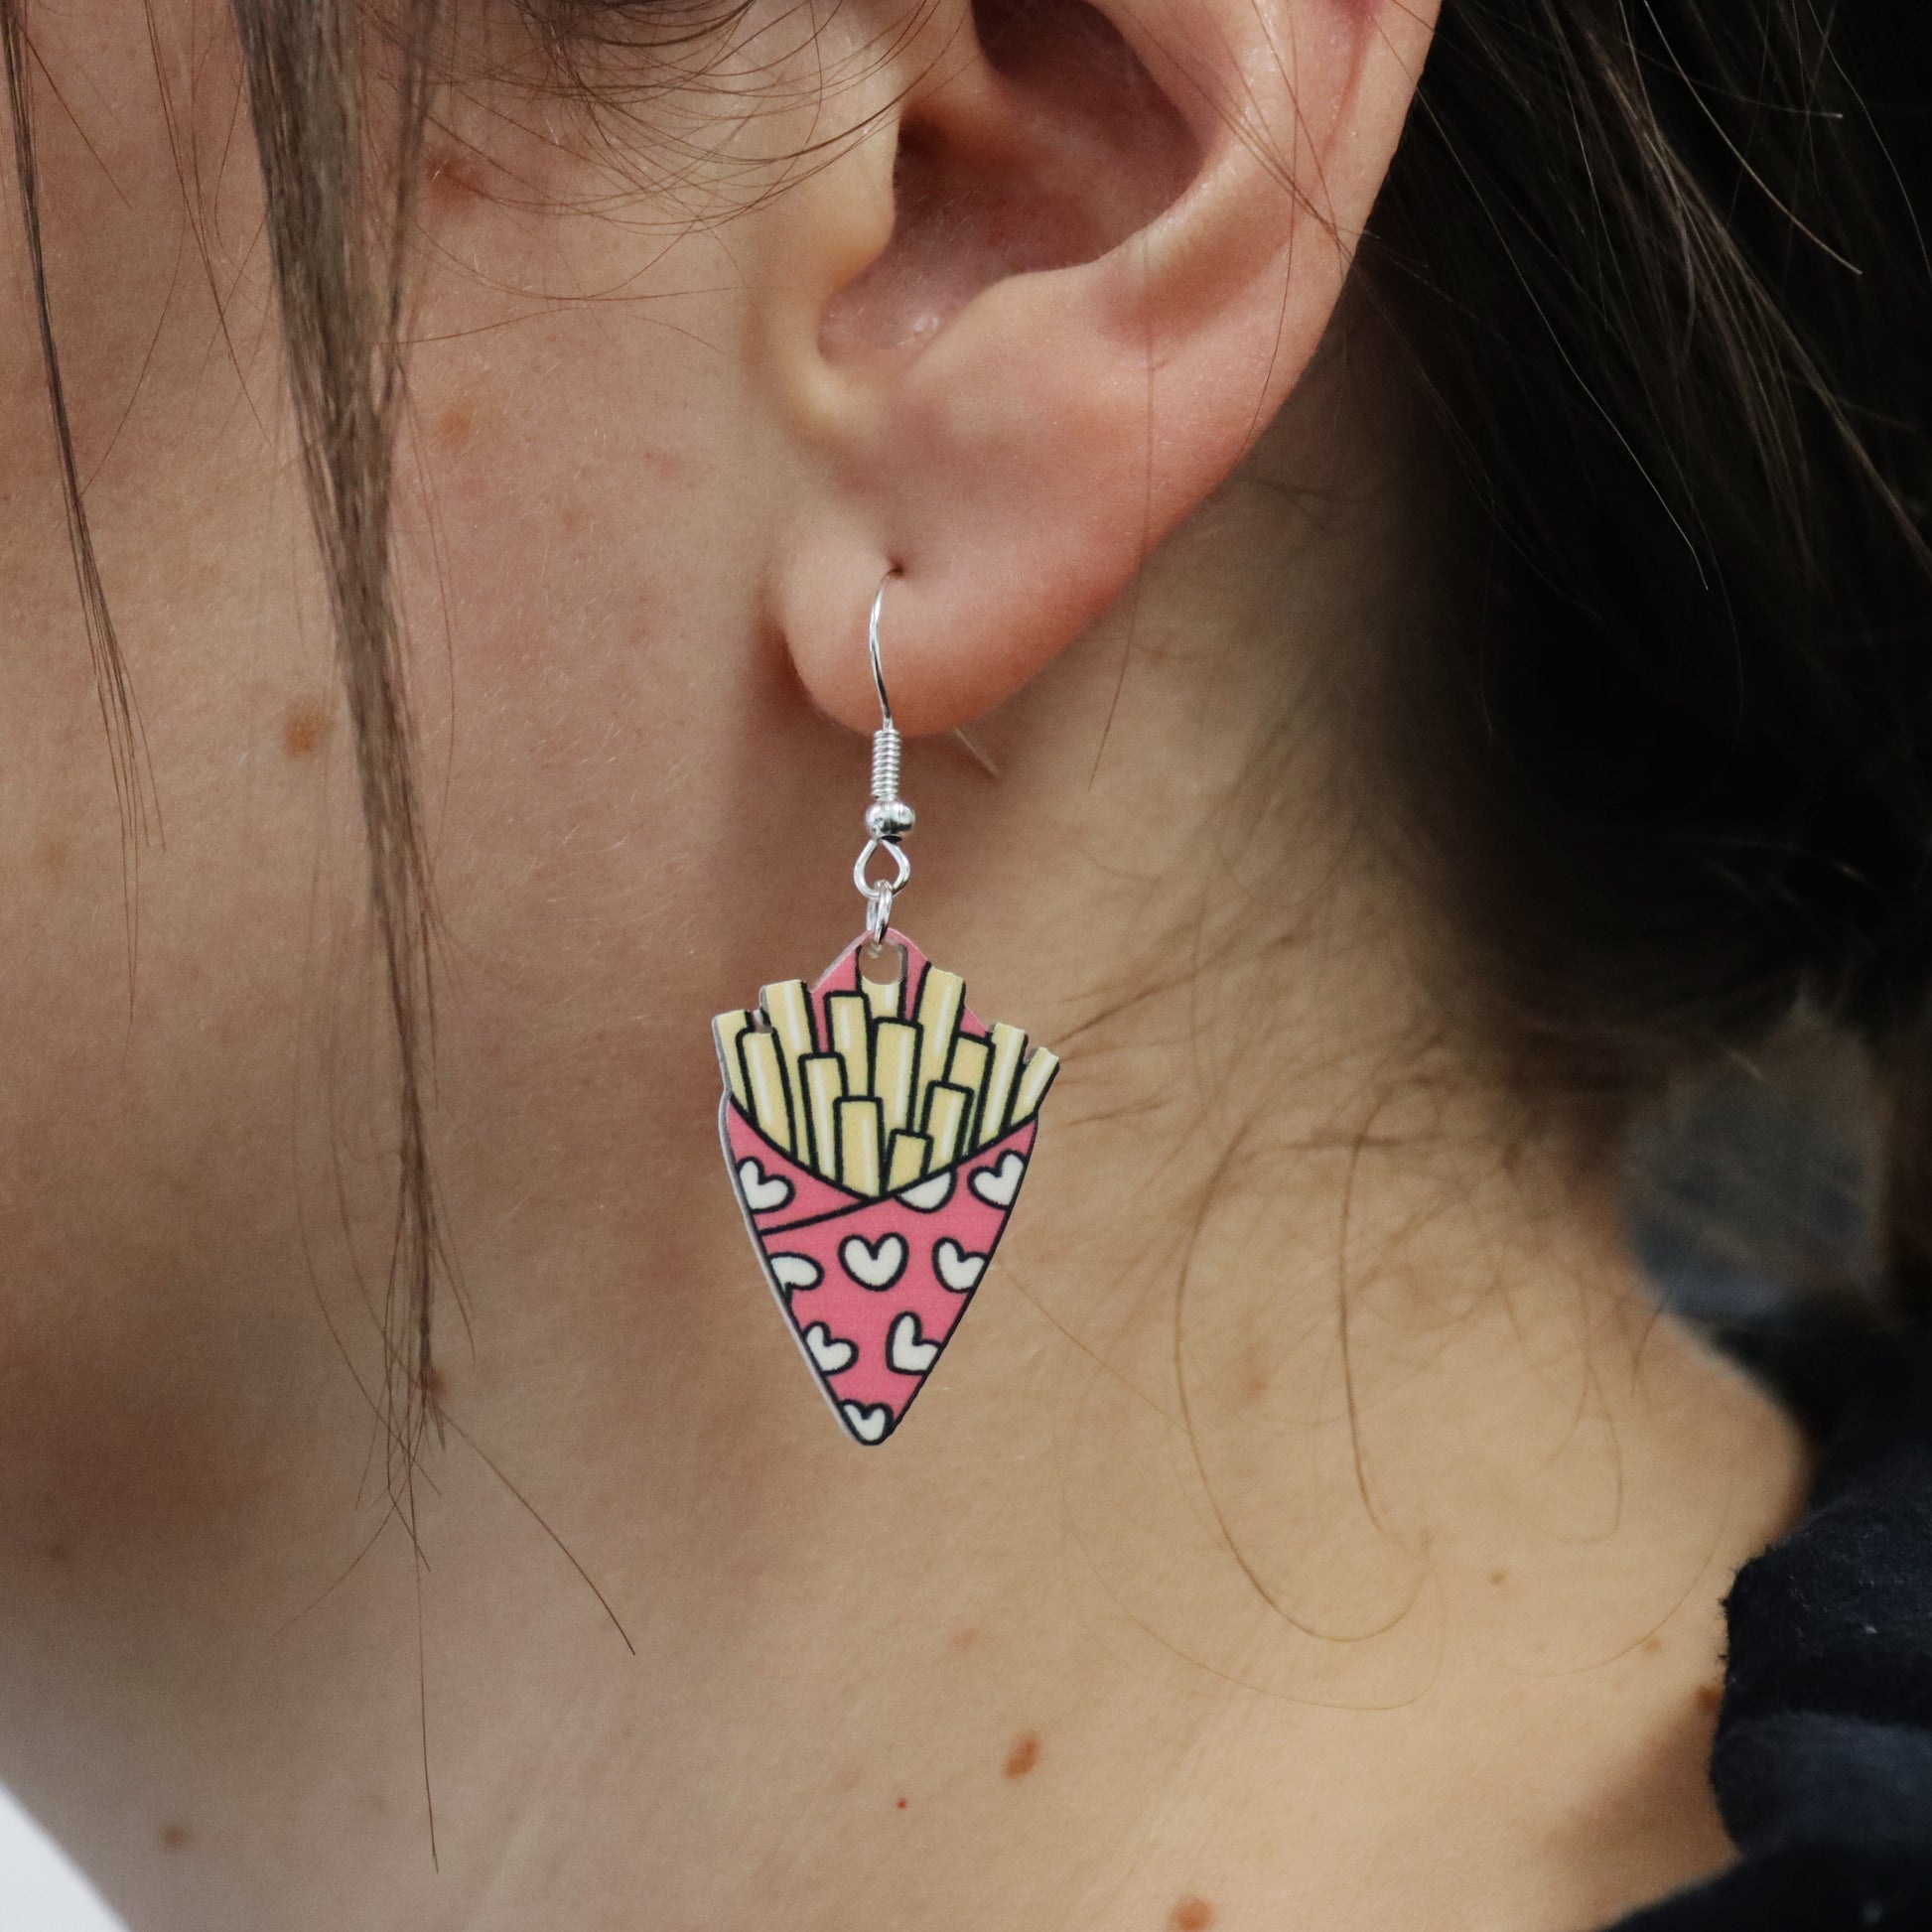 fries before guys valentine&#39;s earring shown in an ear for size reference